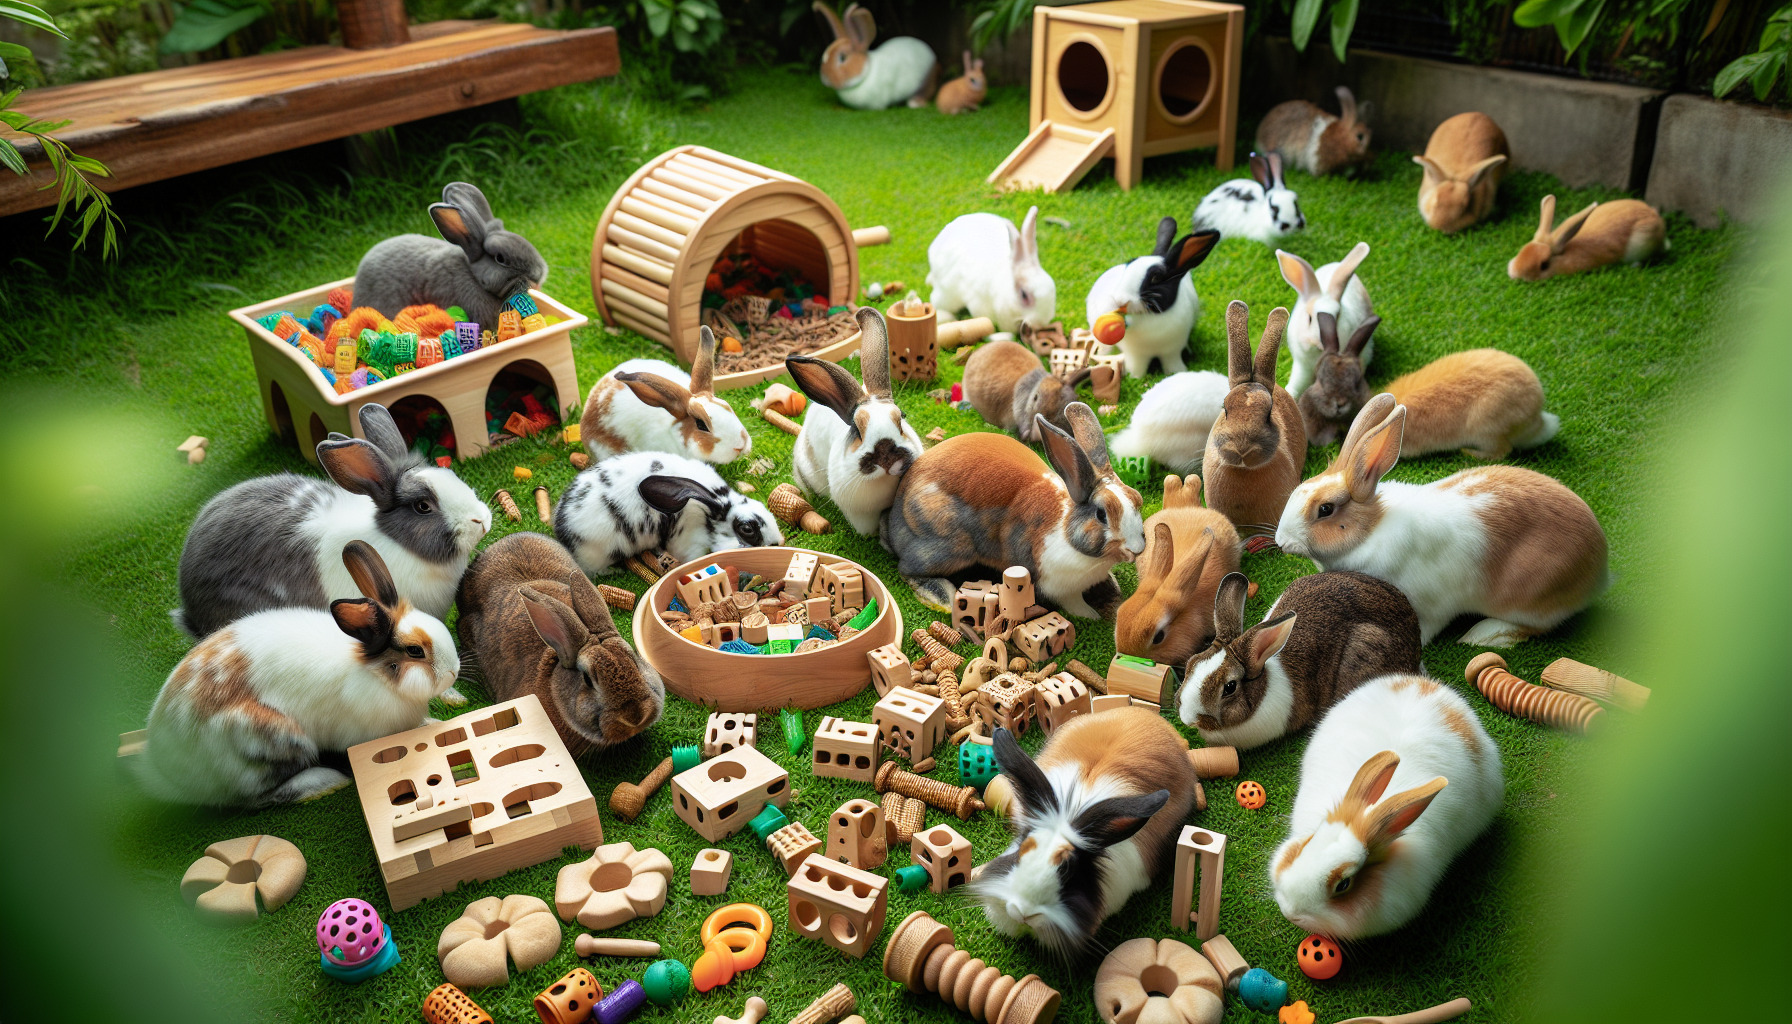 Illustration of rabbits interacting with enrichment toys